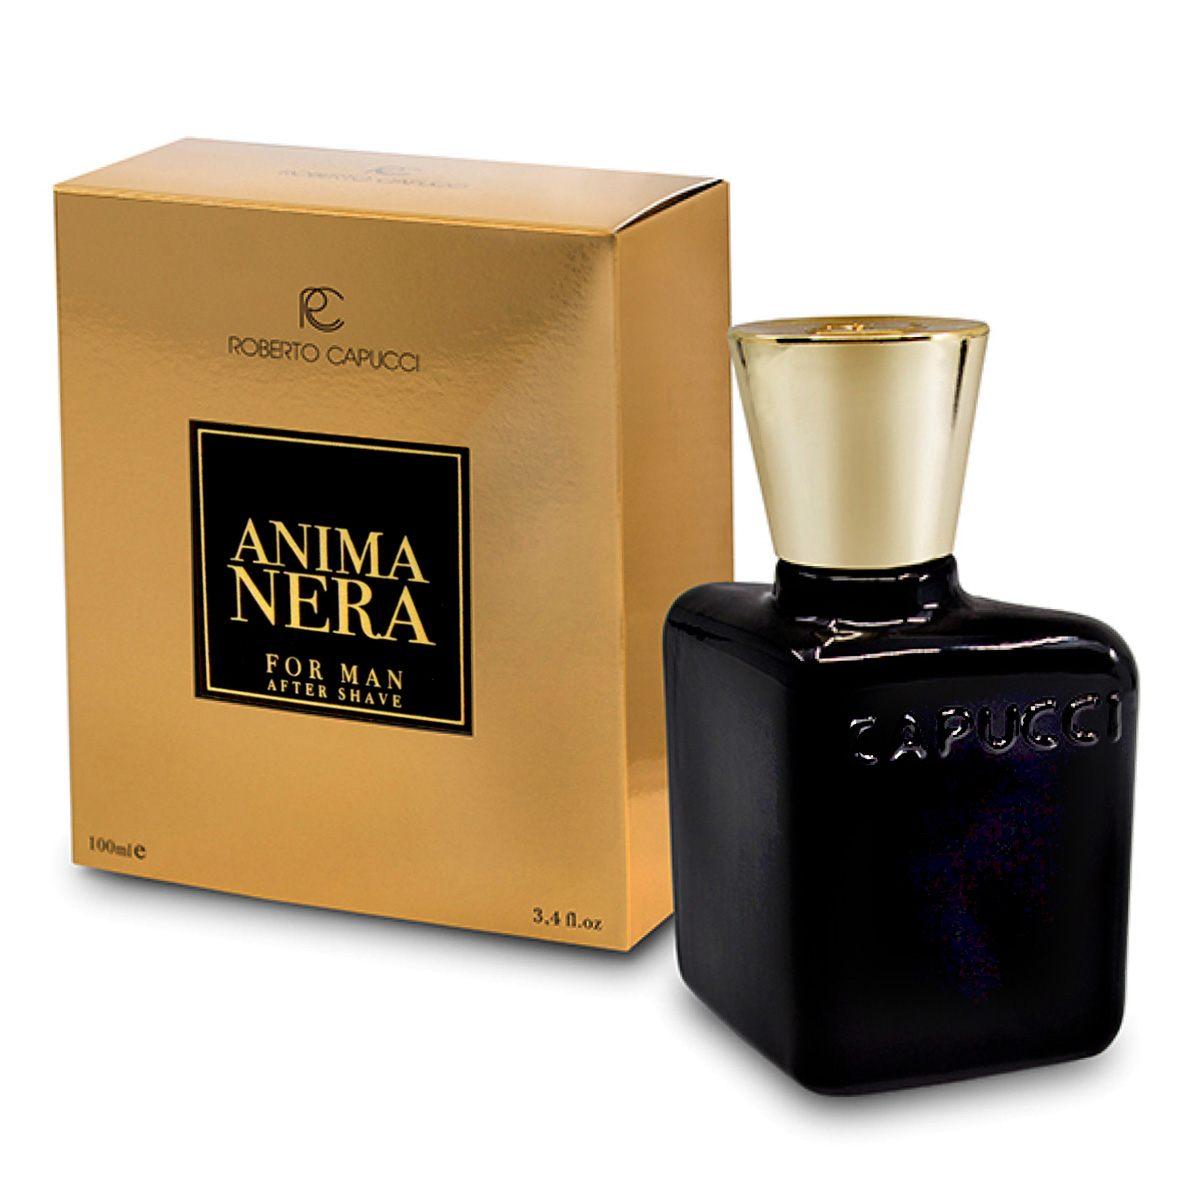 Image of Anima Nera After Shave Roberto Capucci 100ml